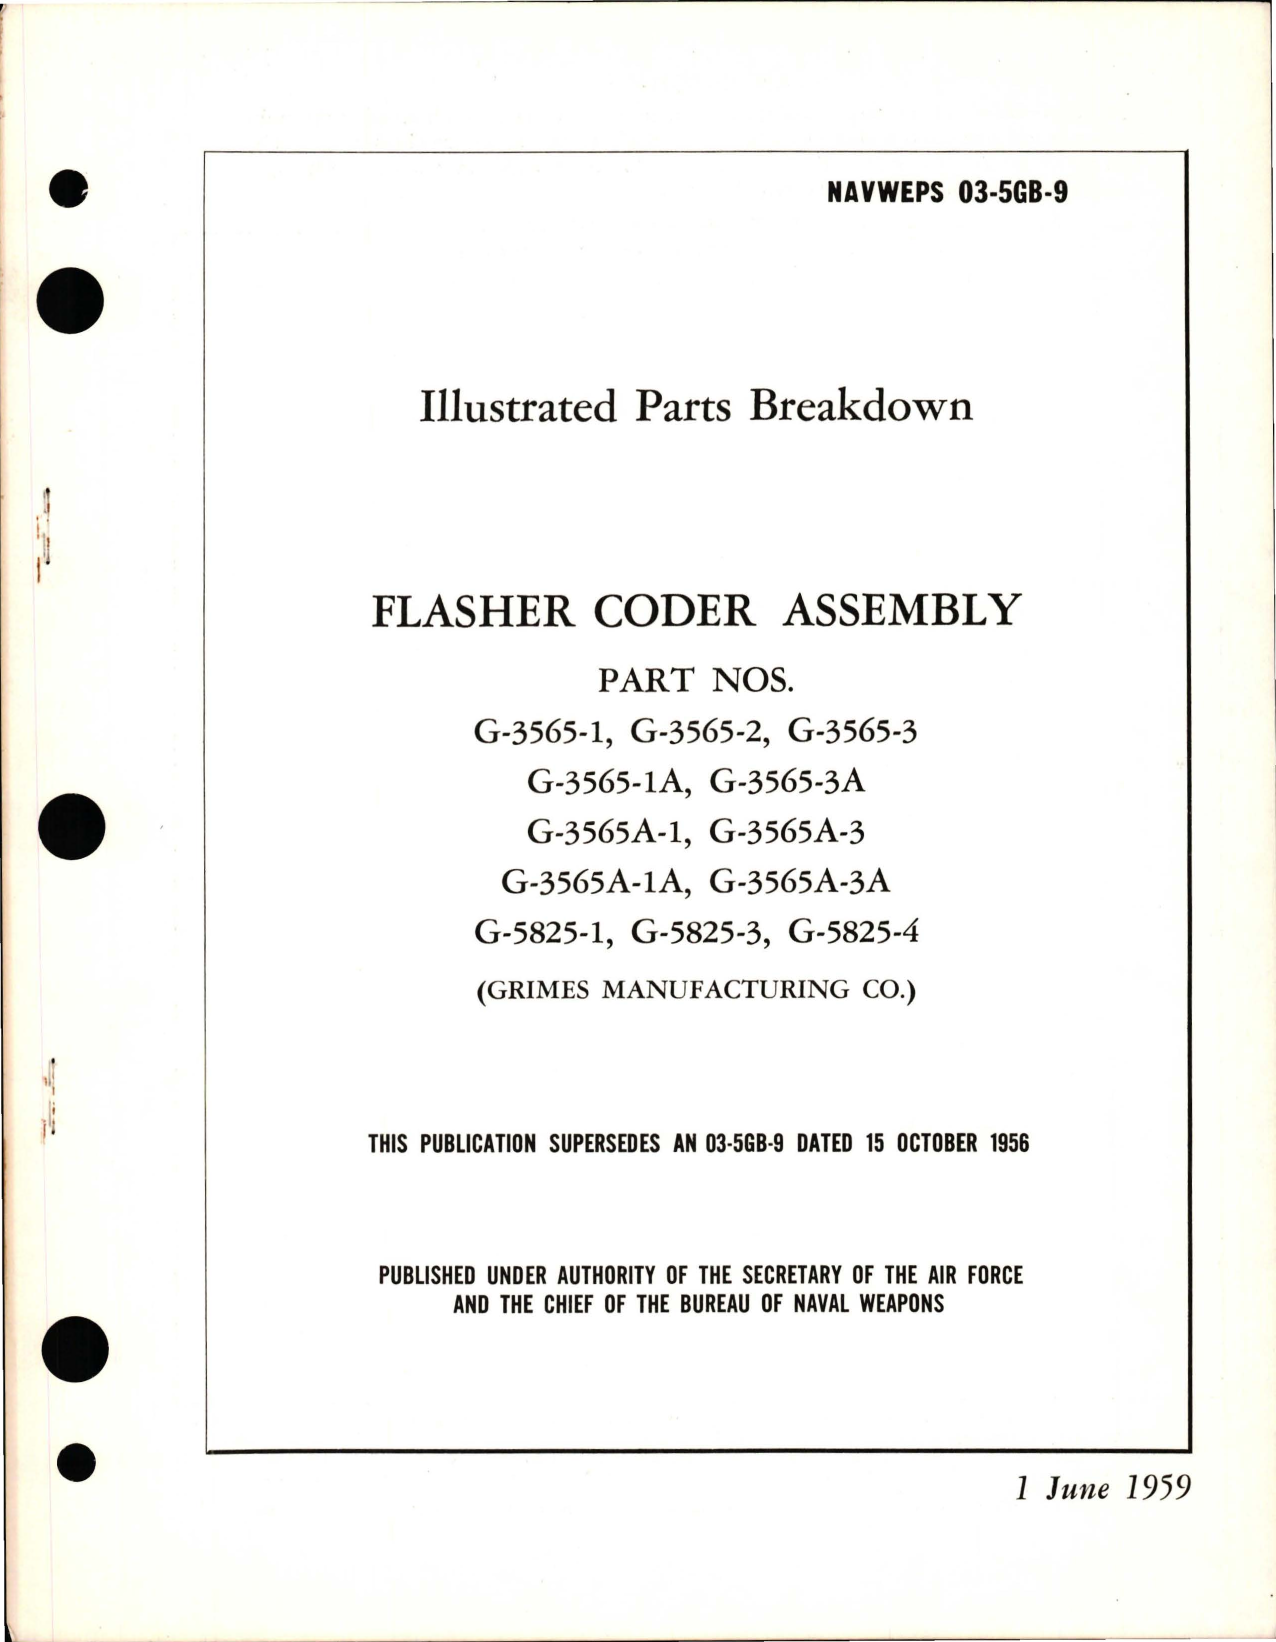 Sample page 1 from AirCorps Library document: Illustrated Parts Breadown for Flasher Coder Assembly 